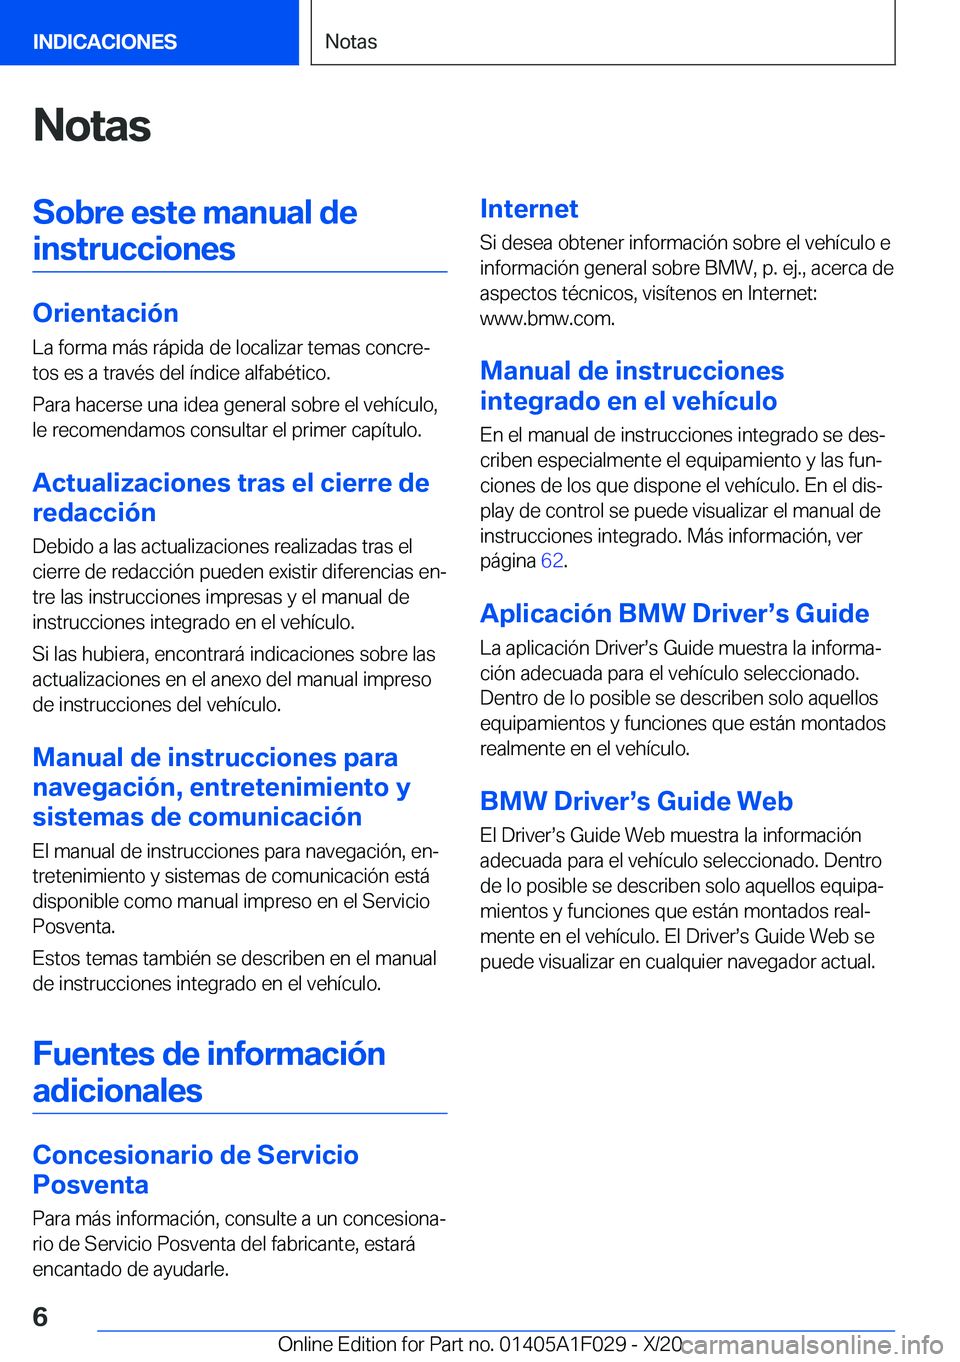 BMW X1 2021  Manuales de Empleo (in Spanish) �N�o�t�a�s�S�o�b�r�e��e�s�t�e��m�a�n�u�a�l��d�e�i�n�s�t�r�u�c�c�i�o�n�e�s
�O�r�i�e�n�t�a�c�i�